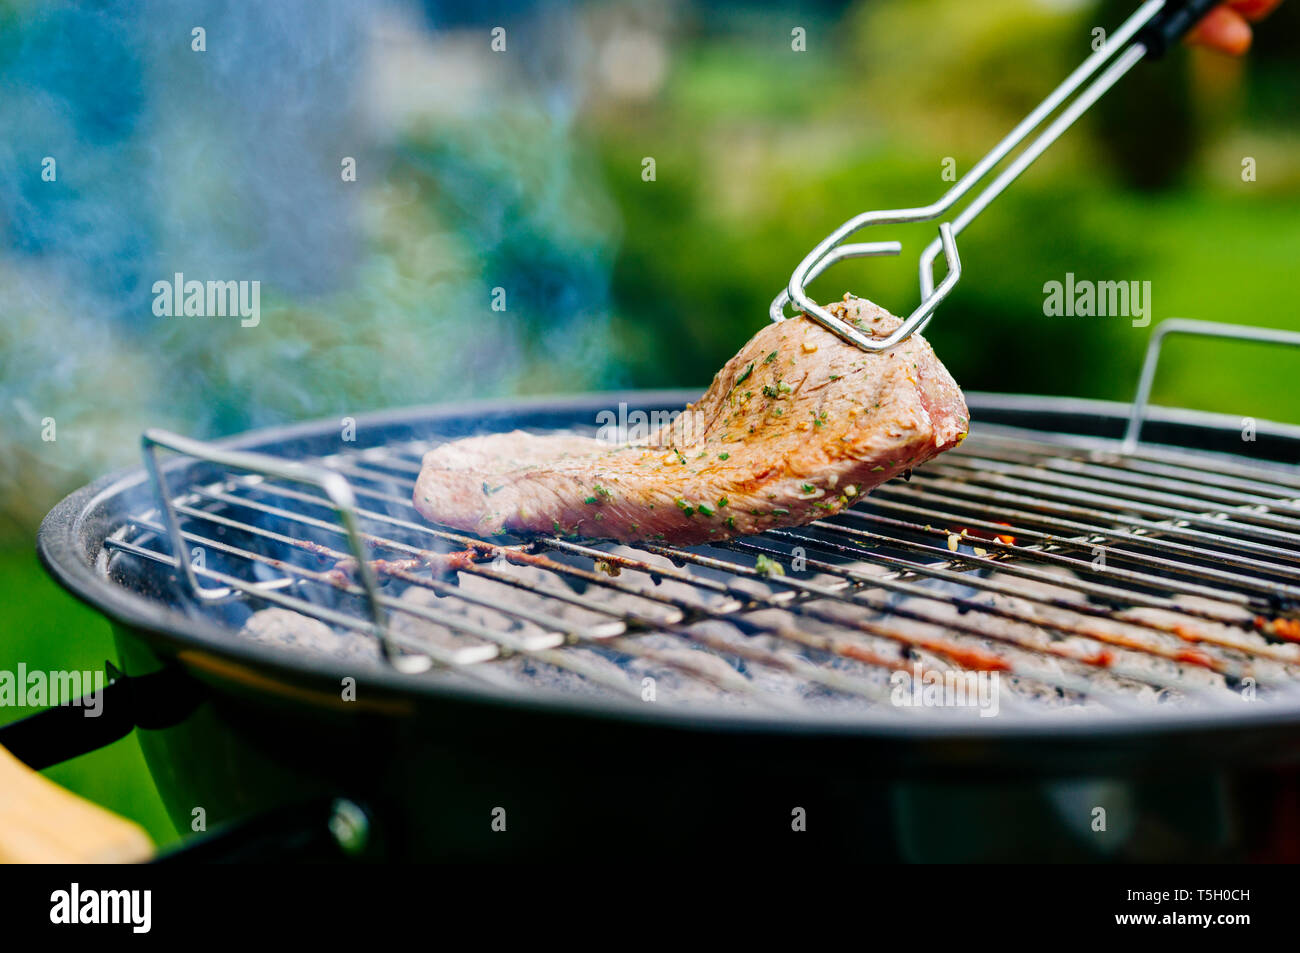 Grilling lamb fillet on charcoal grill Stock Photo